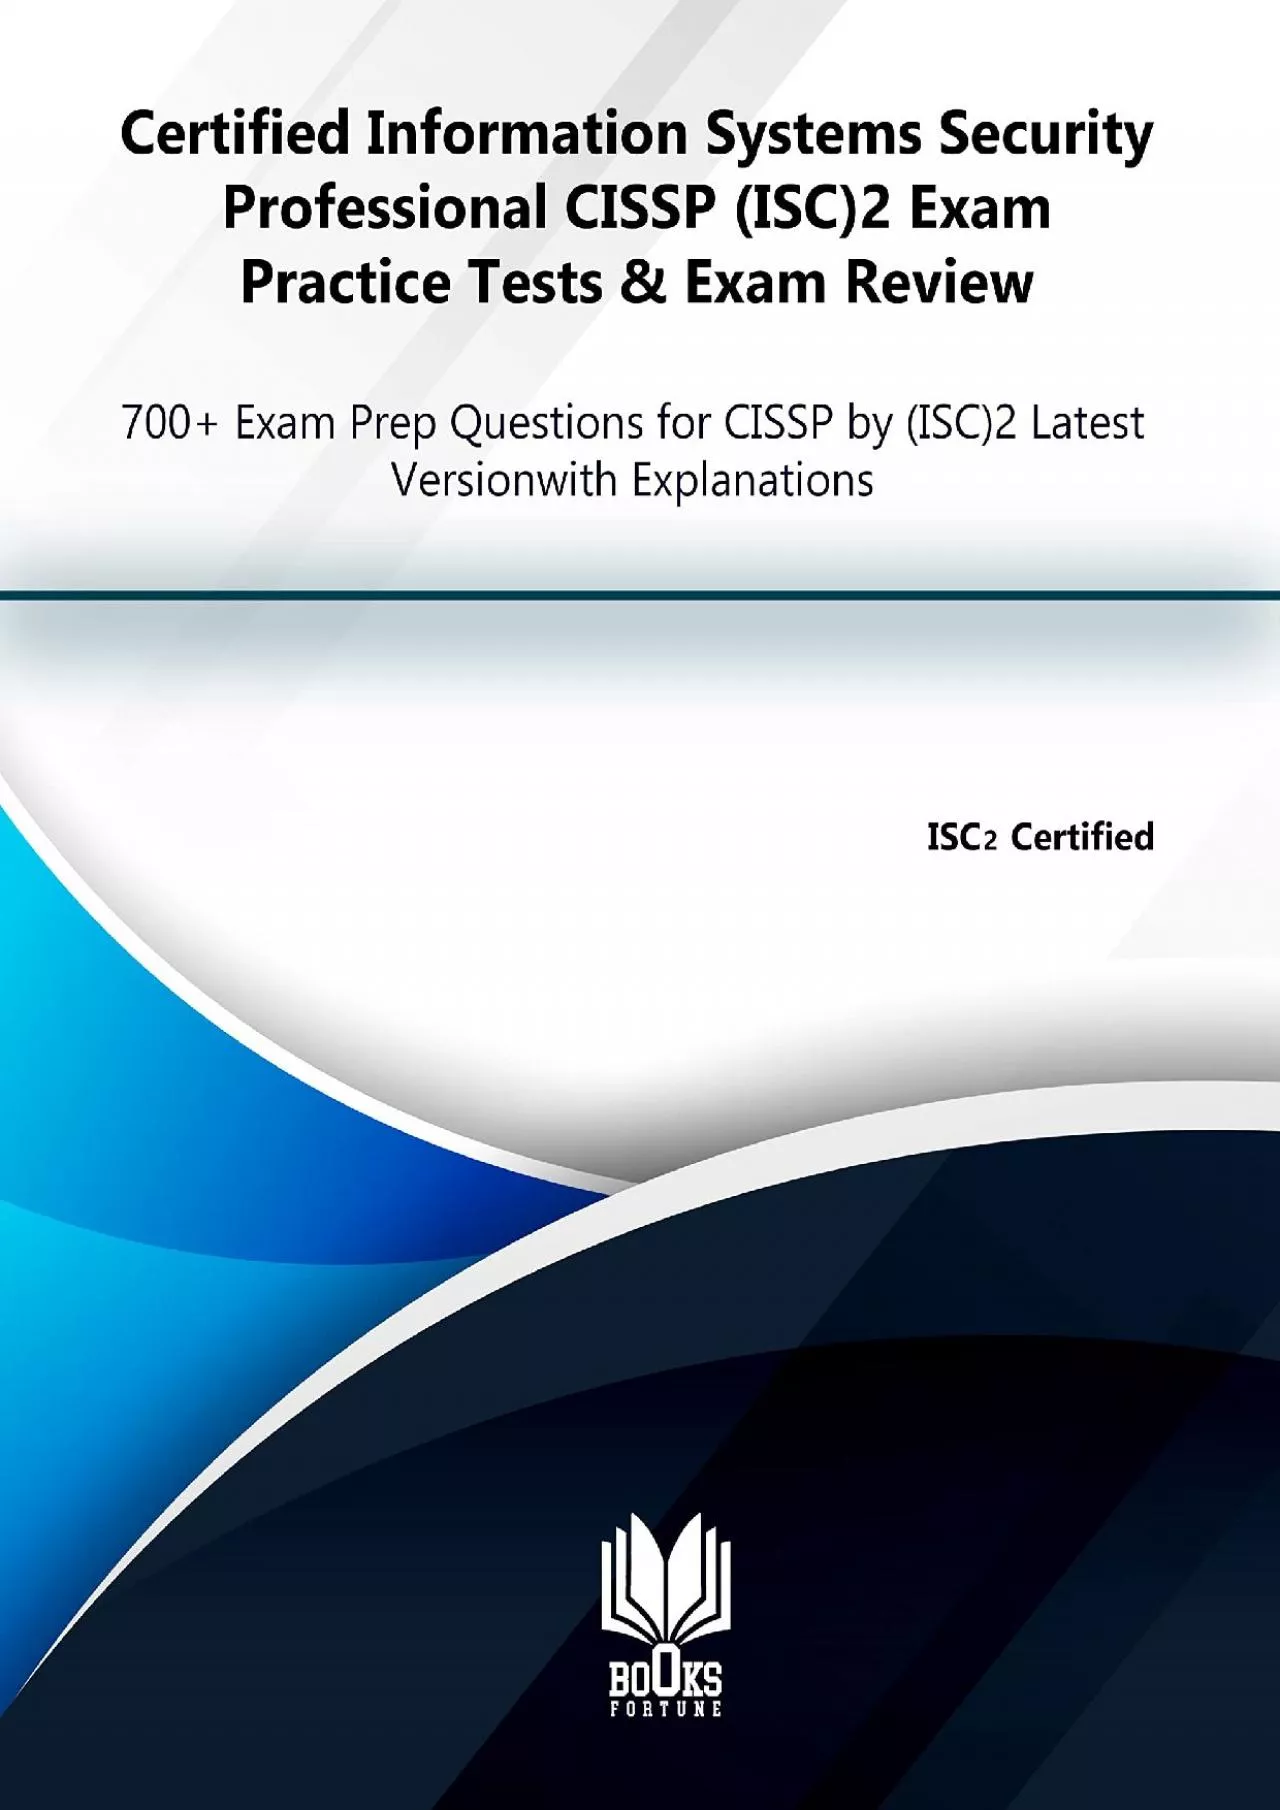 [FREE]-Certified Information Systems Security Professional CISSP (ISC)2 Exam Practice